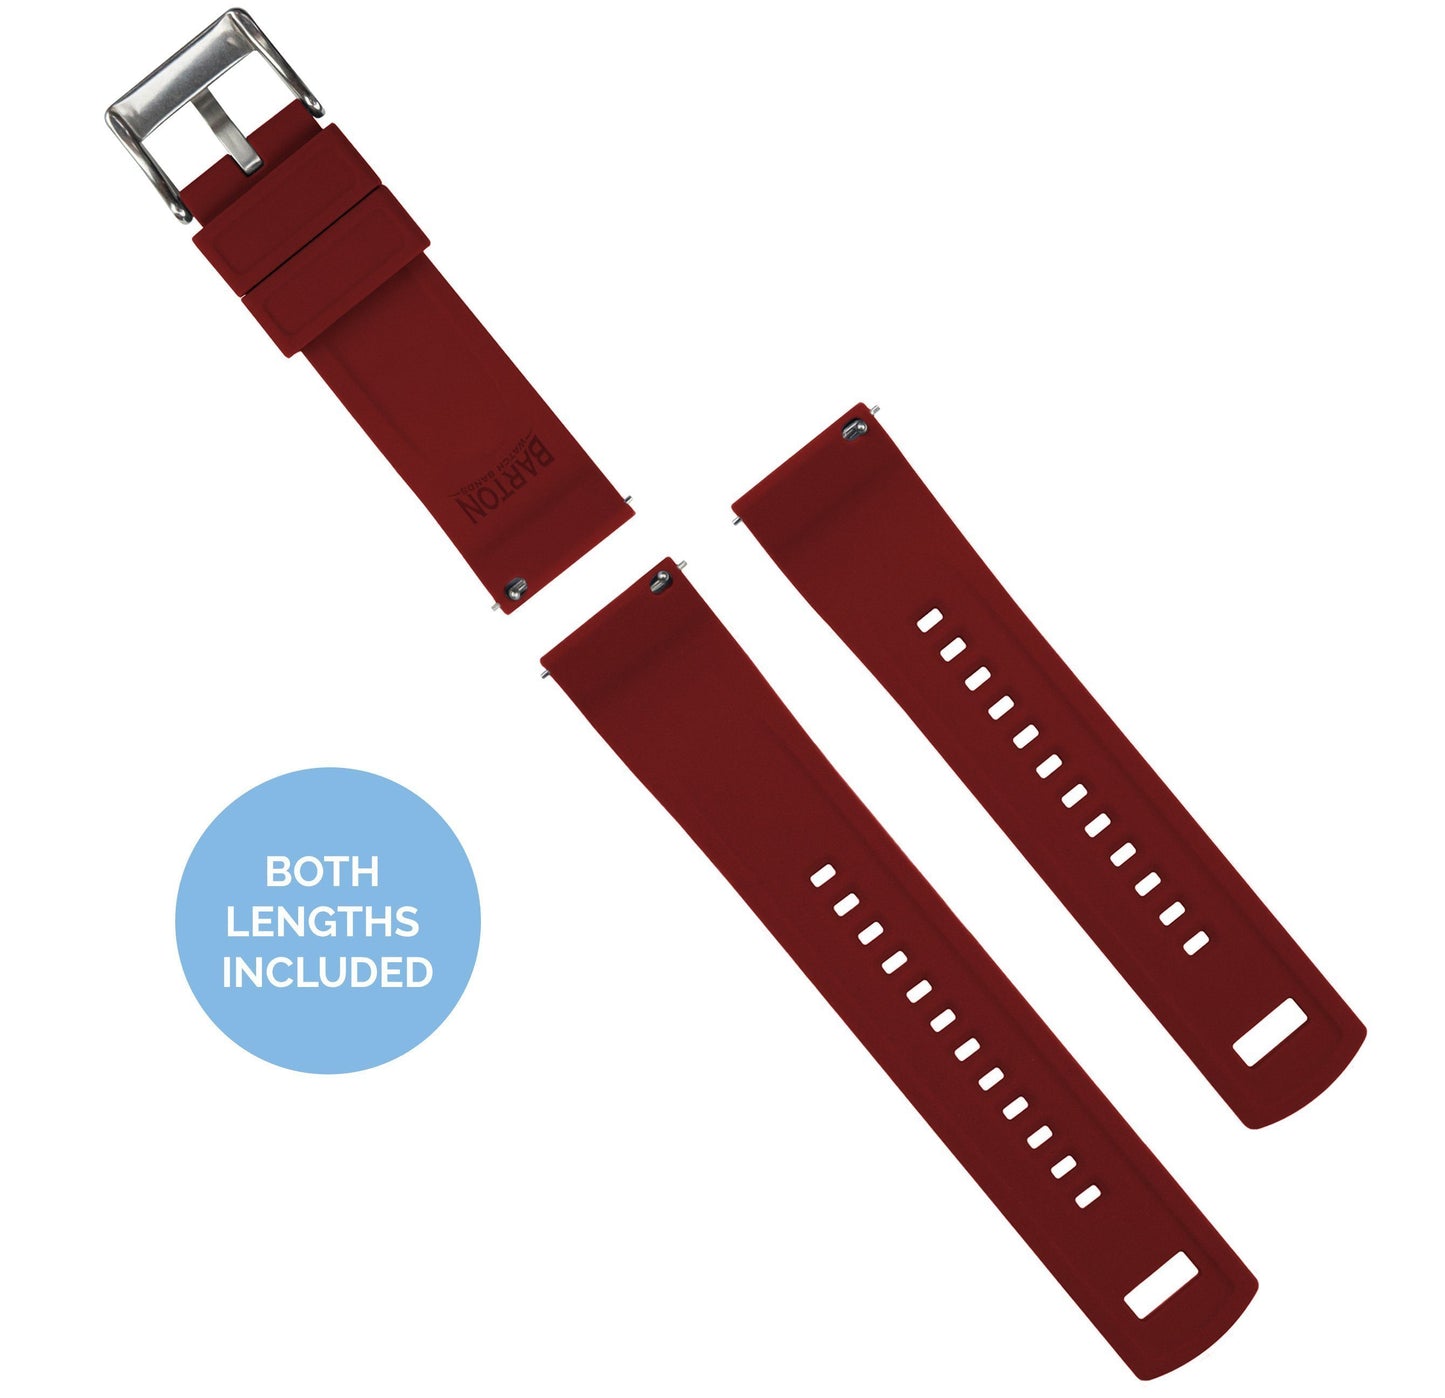 Withings Nokia Activité and Steel HR | Elite Silicone | Black Top / Crimson Red Bottom - Barton Watch Bands